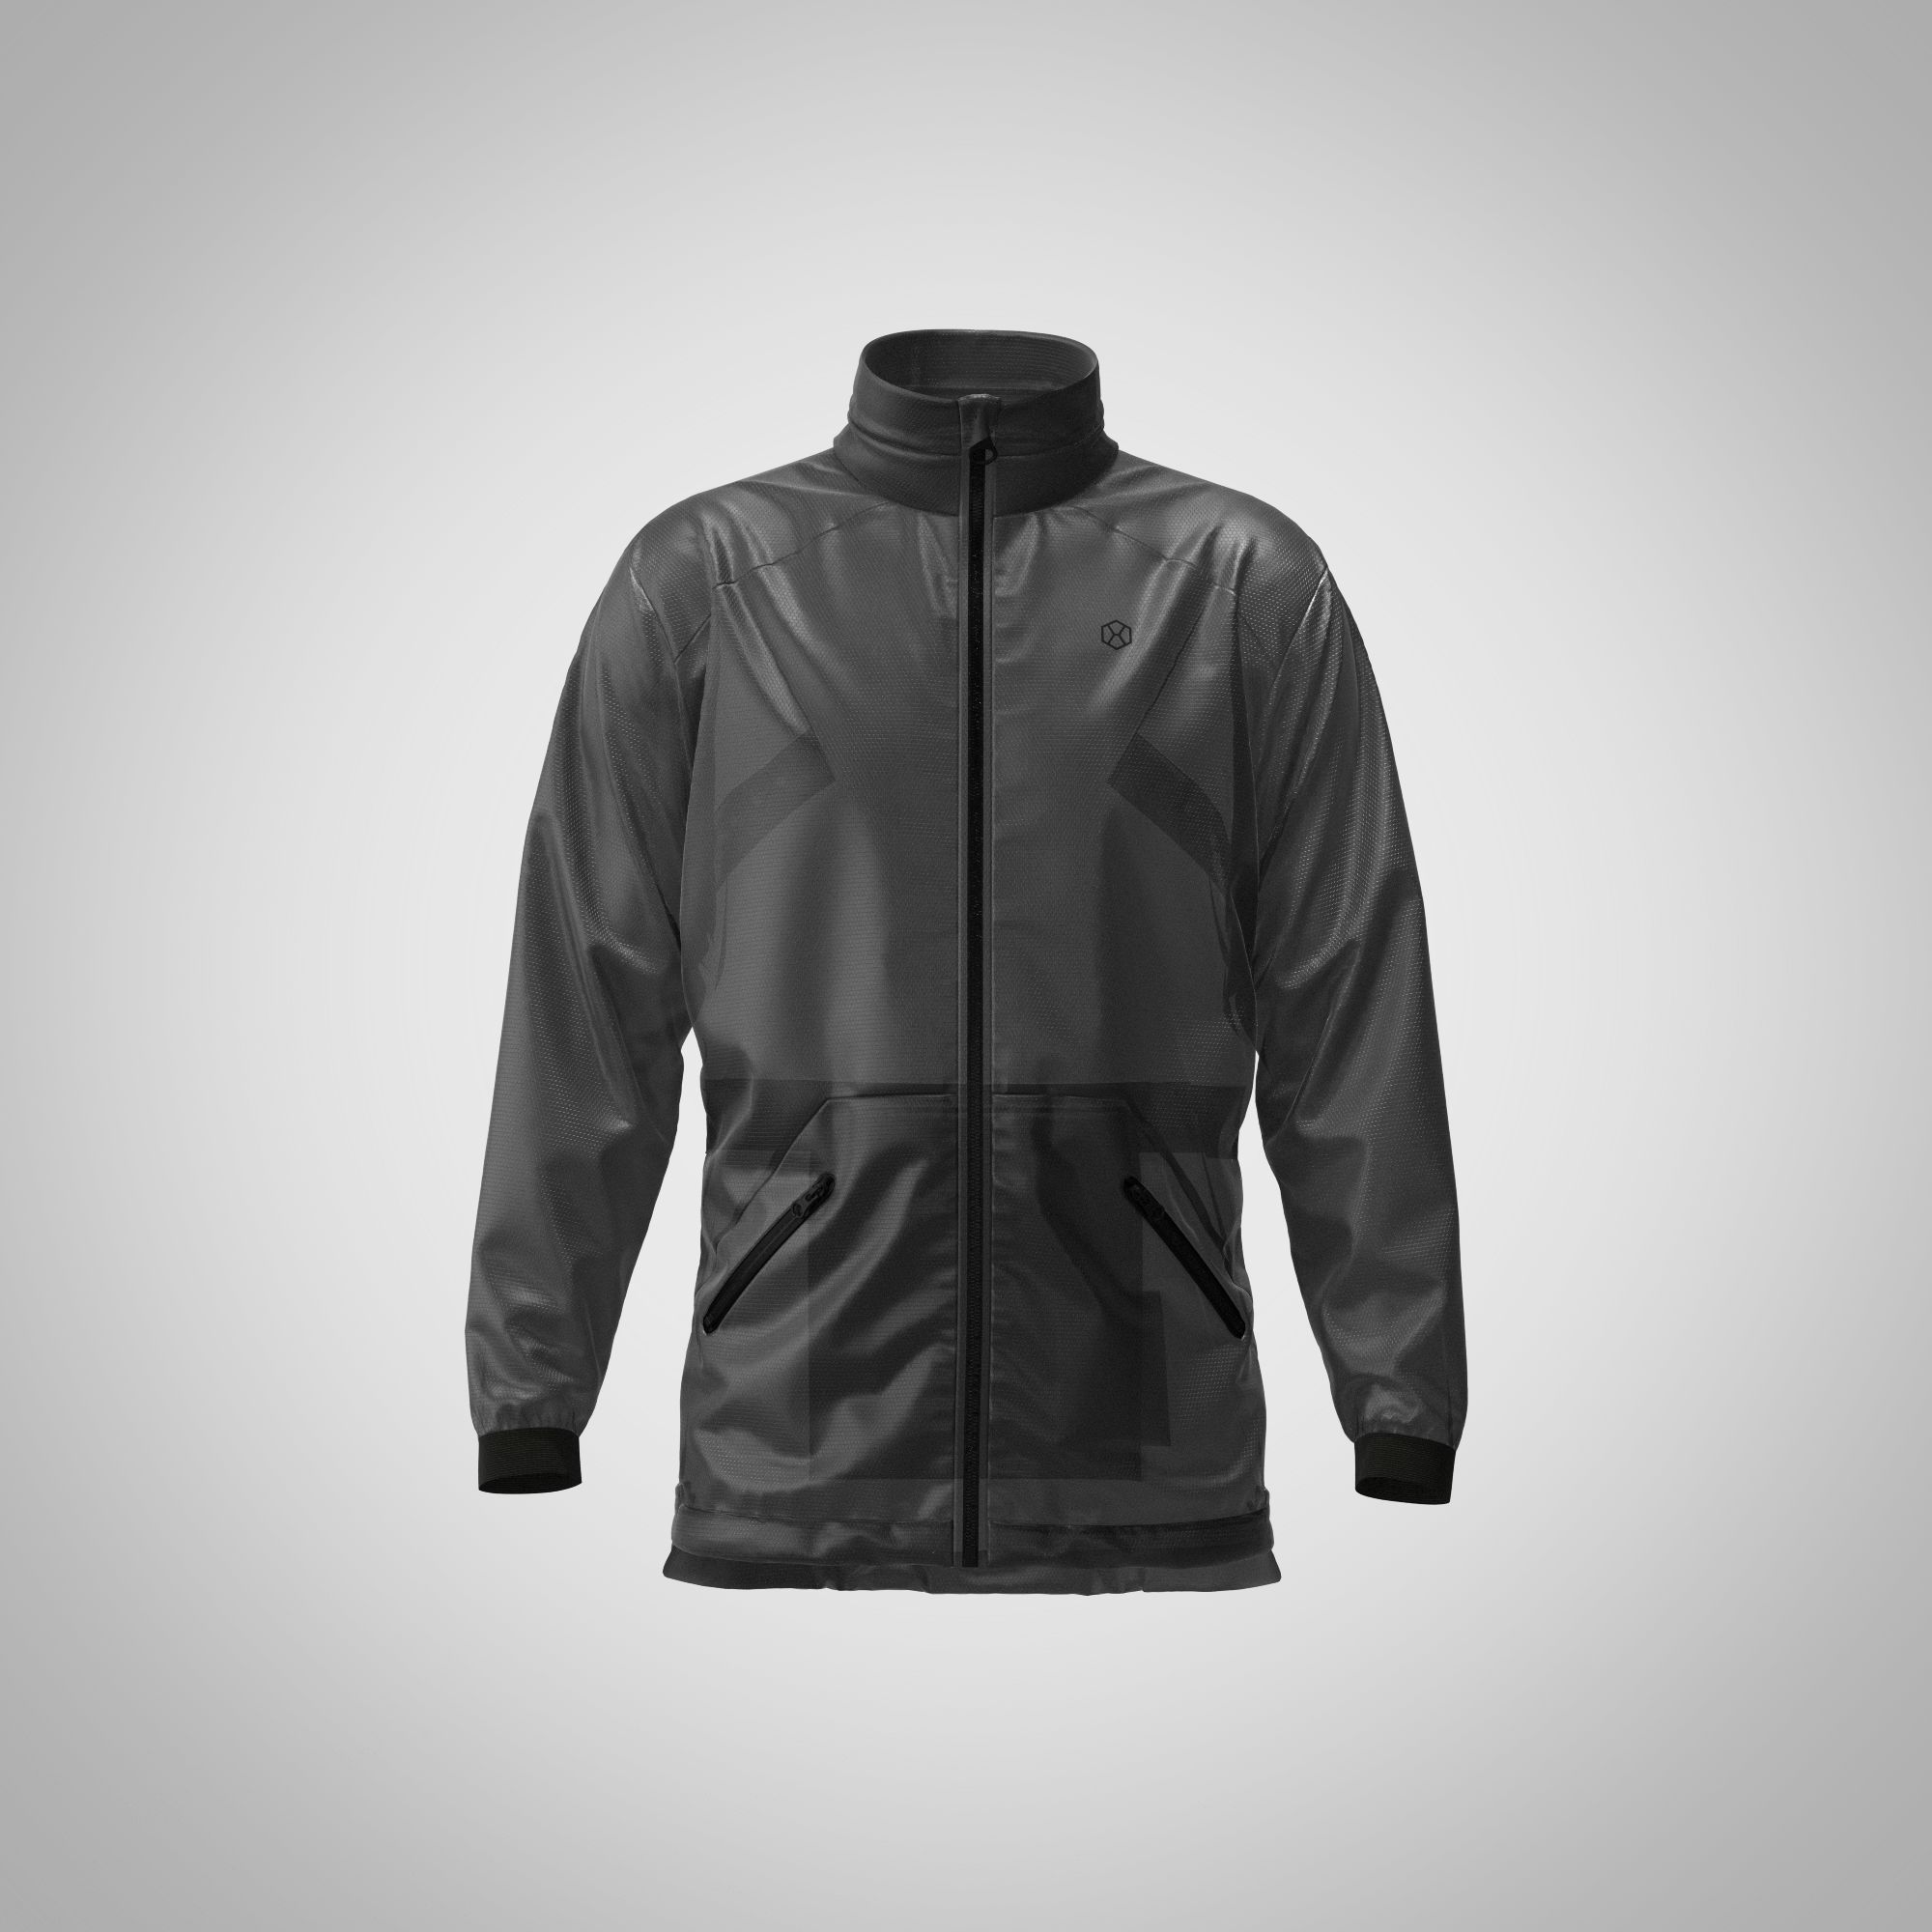 The Nomad(e) Jacket In Black by Graphene-X #21